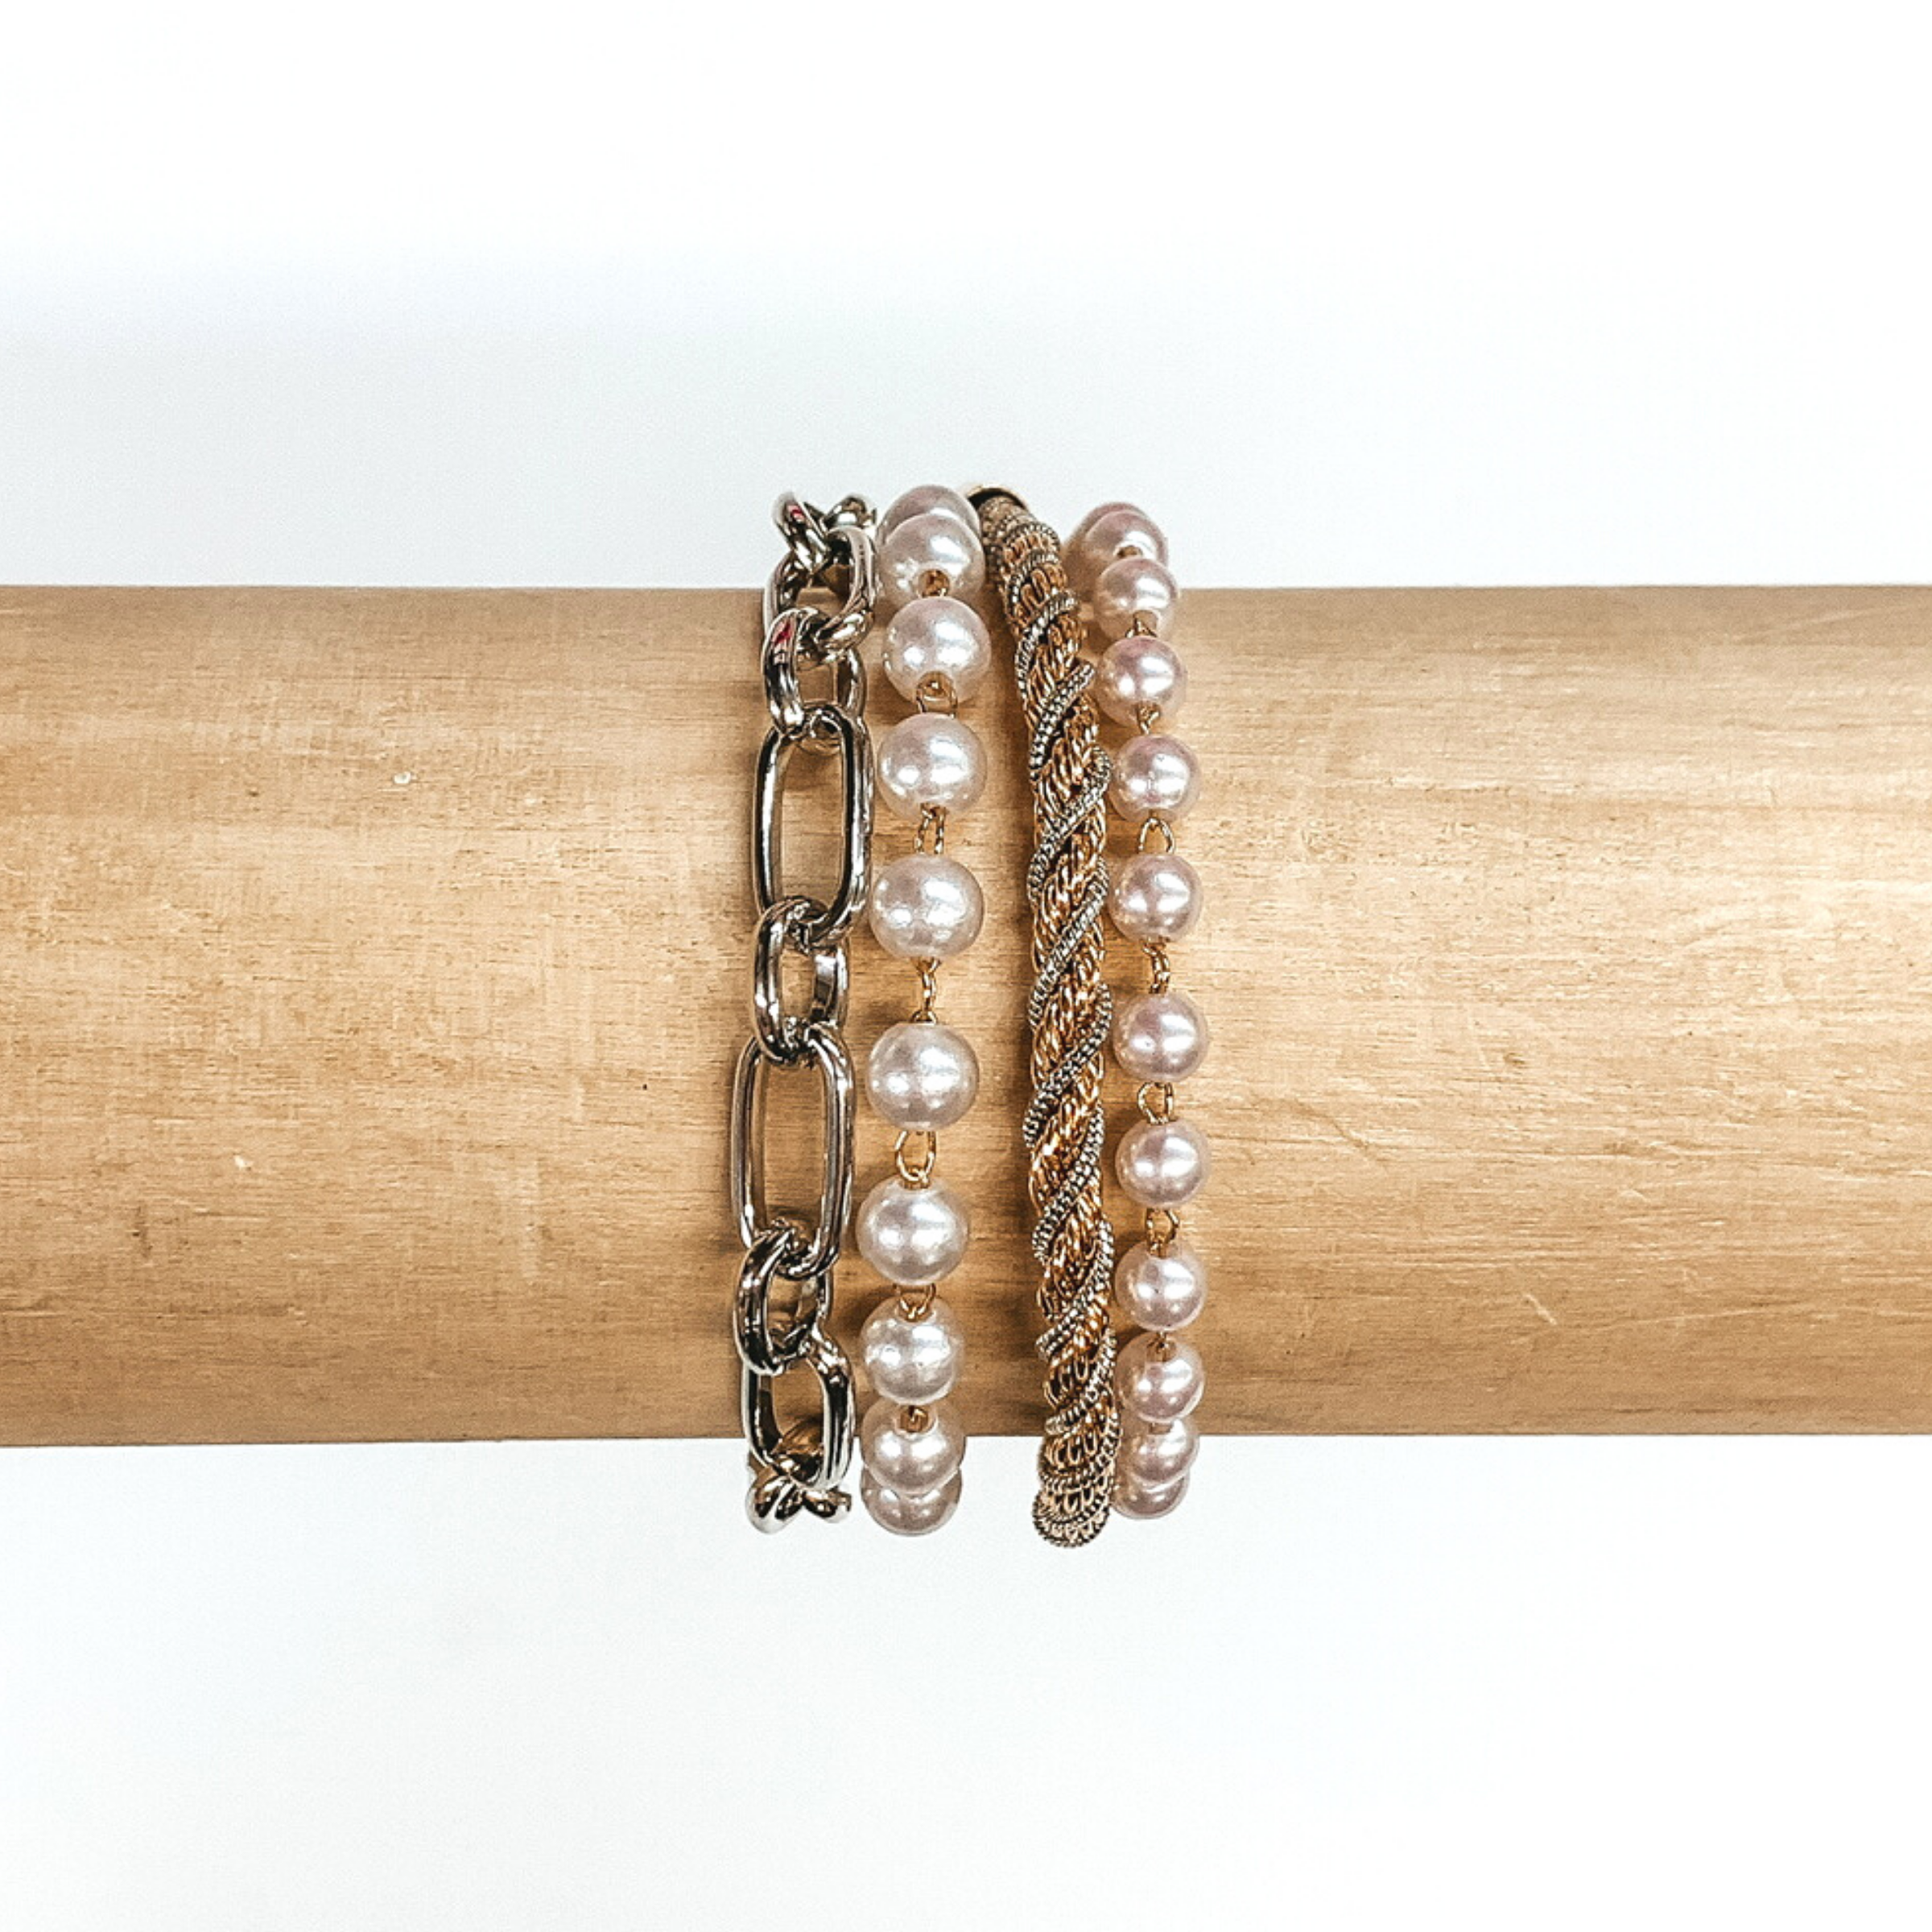 Four stranded bracelet pictured on a wood bracelet holder on a white background. This bracelet has a silver chained strand, two pearl linked with gold circles strand, and a gold and silver rope chain strand. 